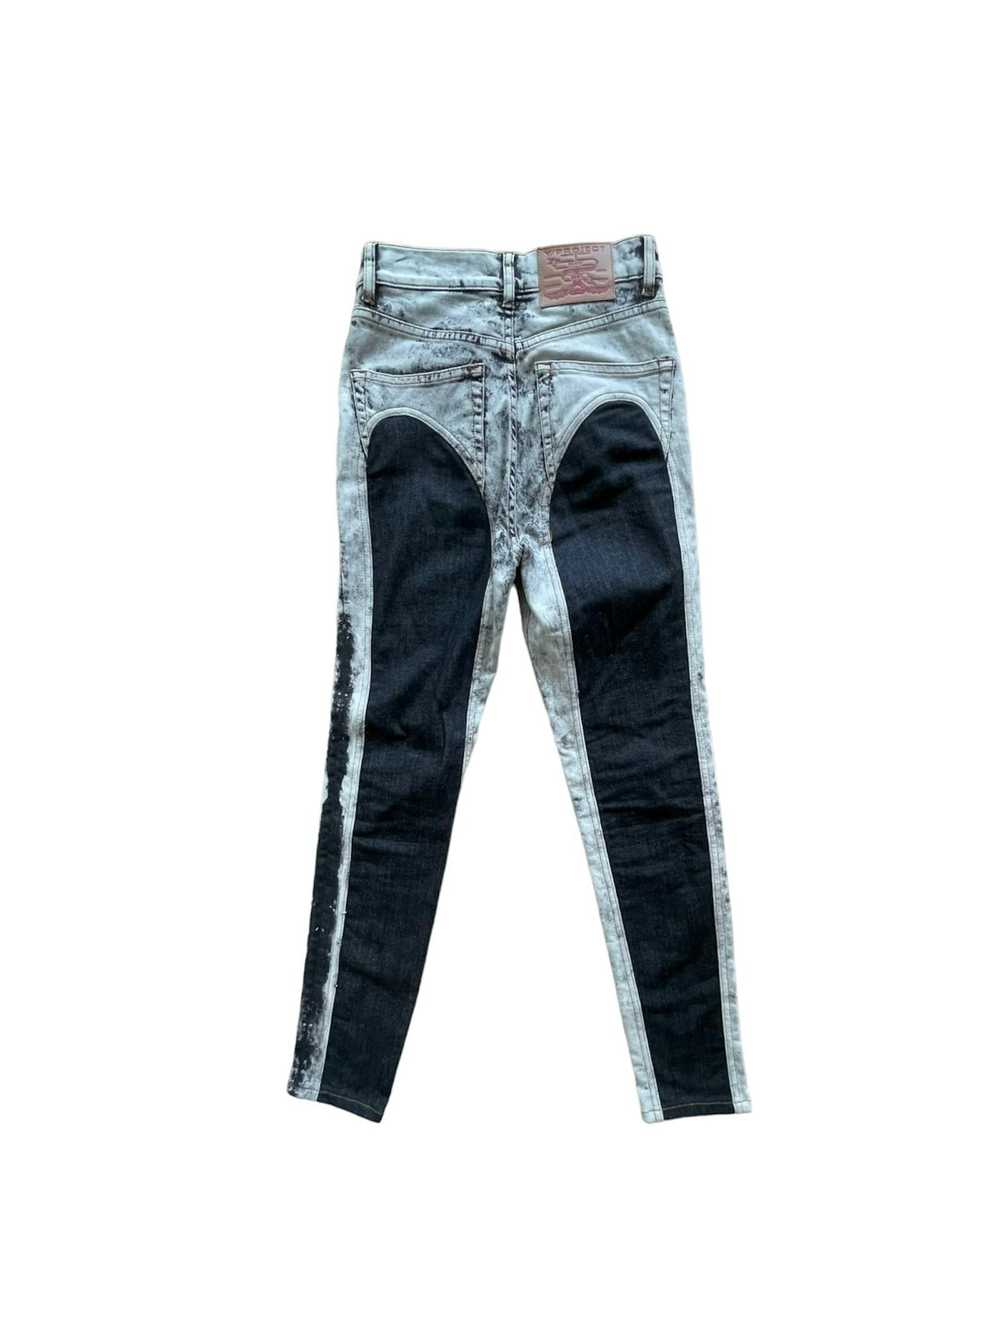 Y/Project Y/Project Denim jeans - image 6